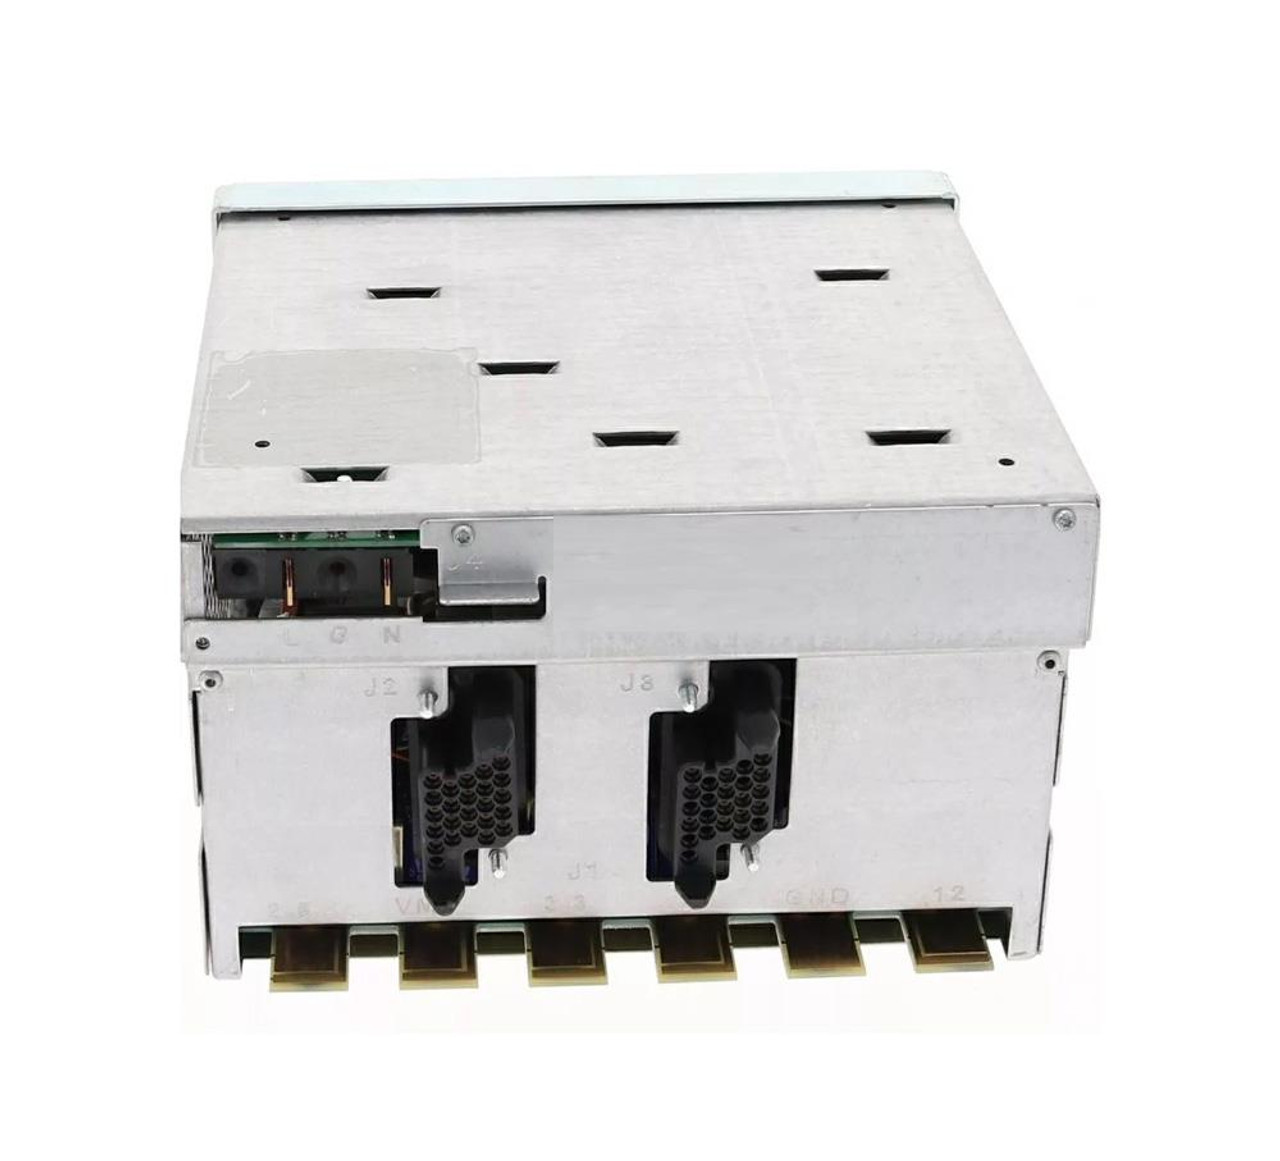 9406-5155 IBM 575-Watts Power Supply for AS400 9406-820